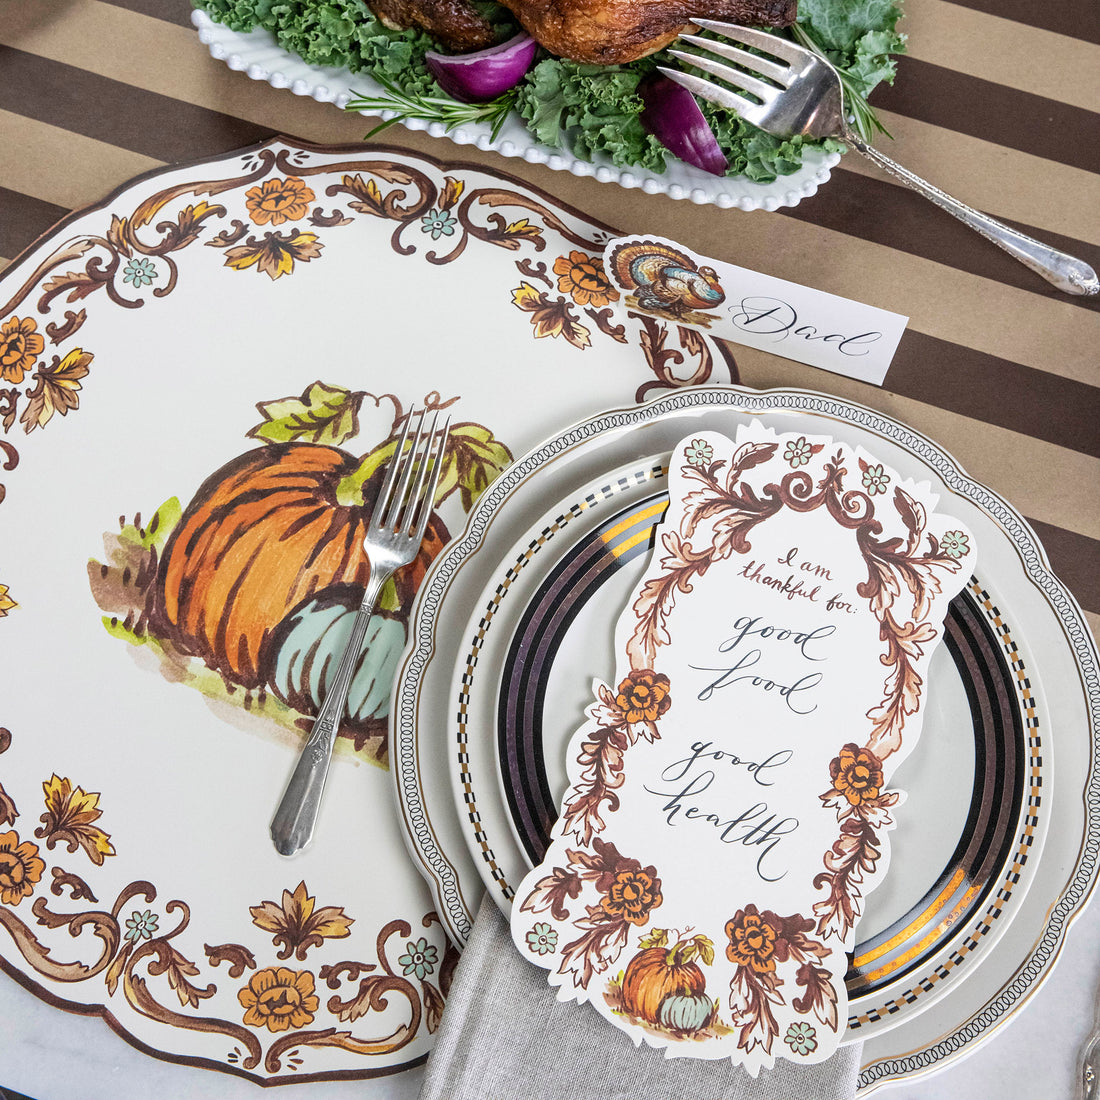 An elegant Thanksgiving place setting featuring an &quot;I Am Thankful For&quot; Table Accent resting on the plate.